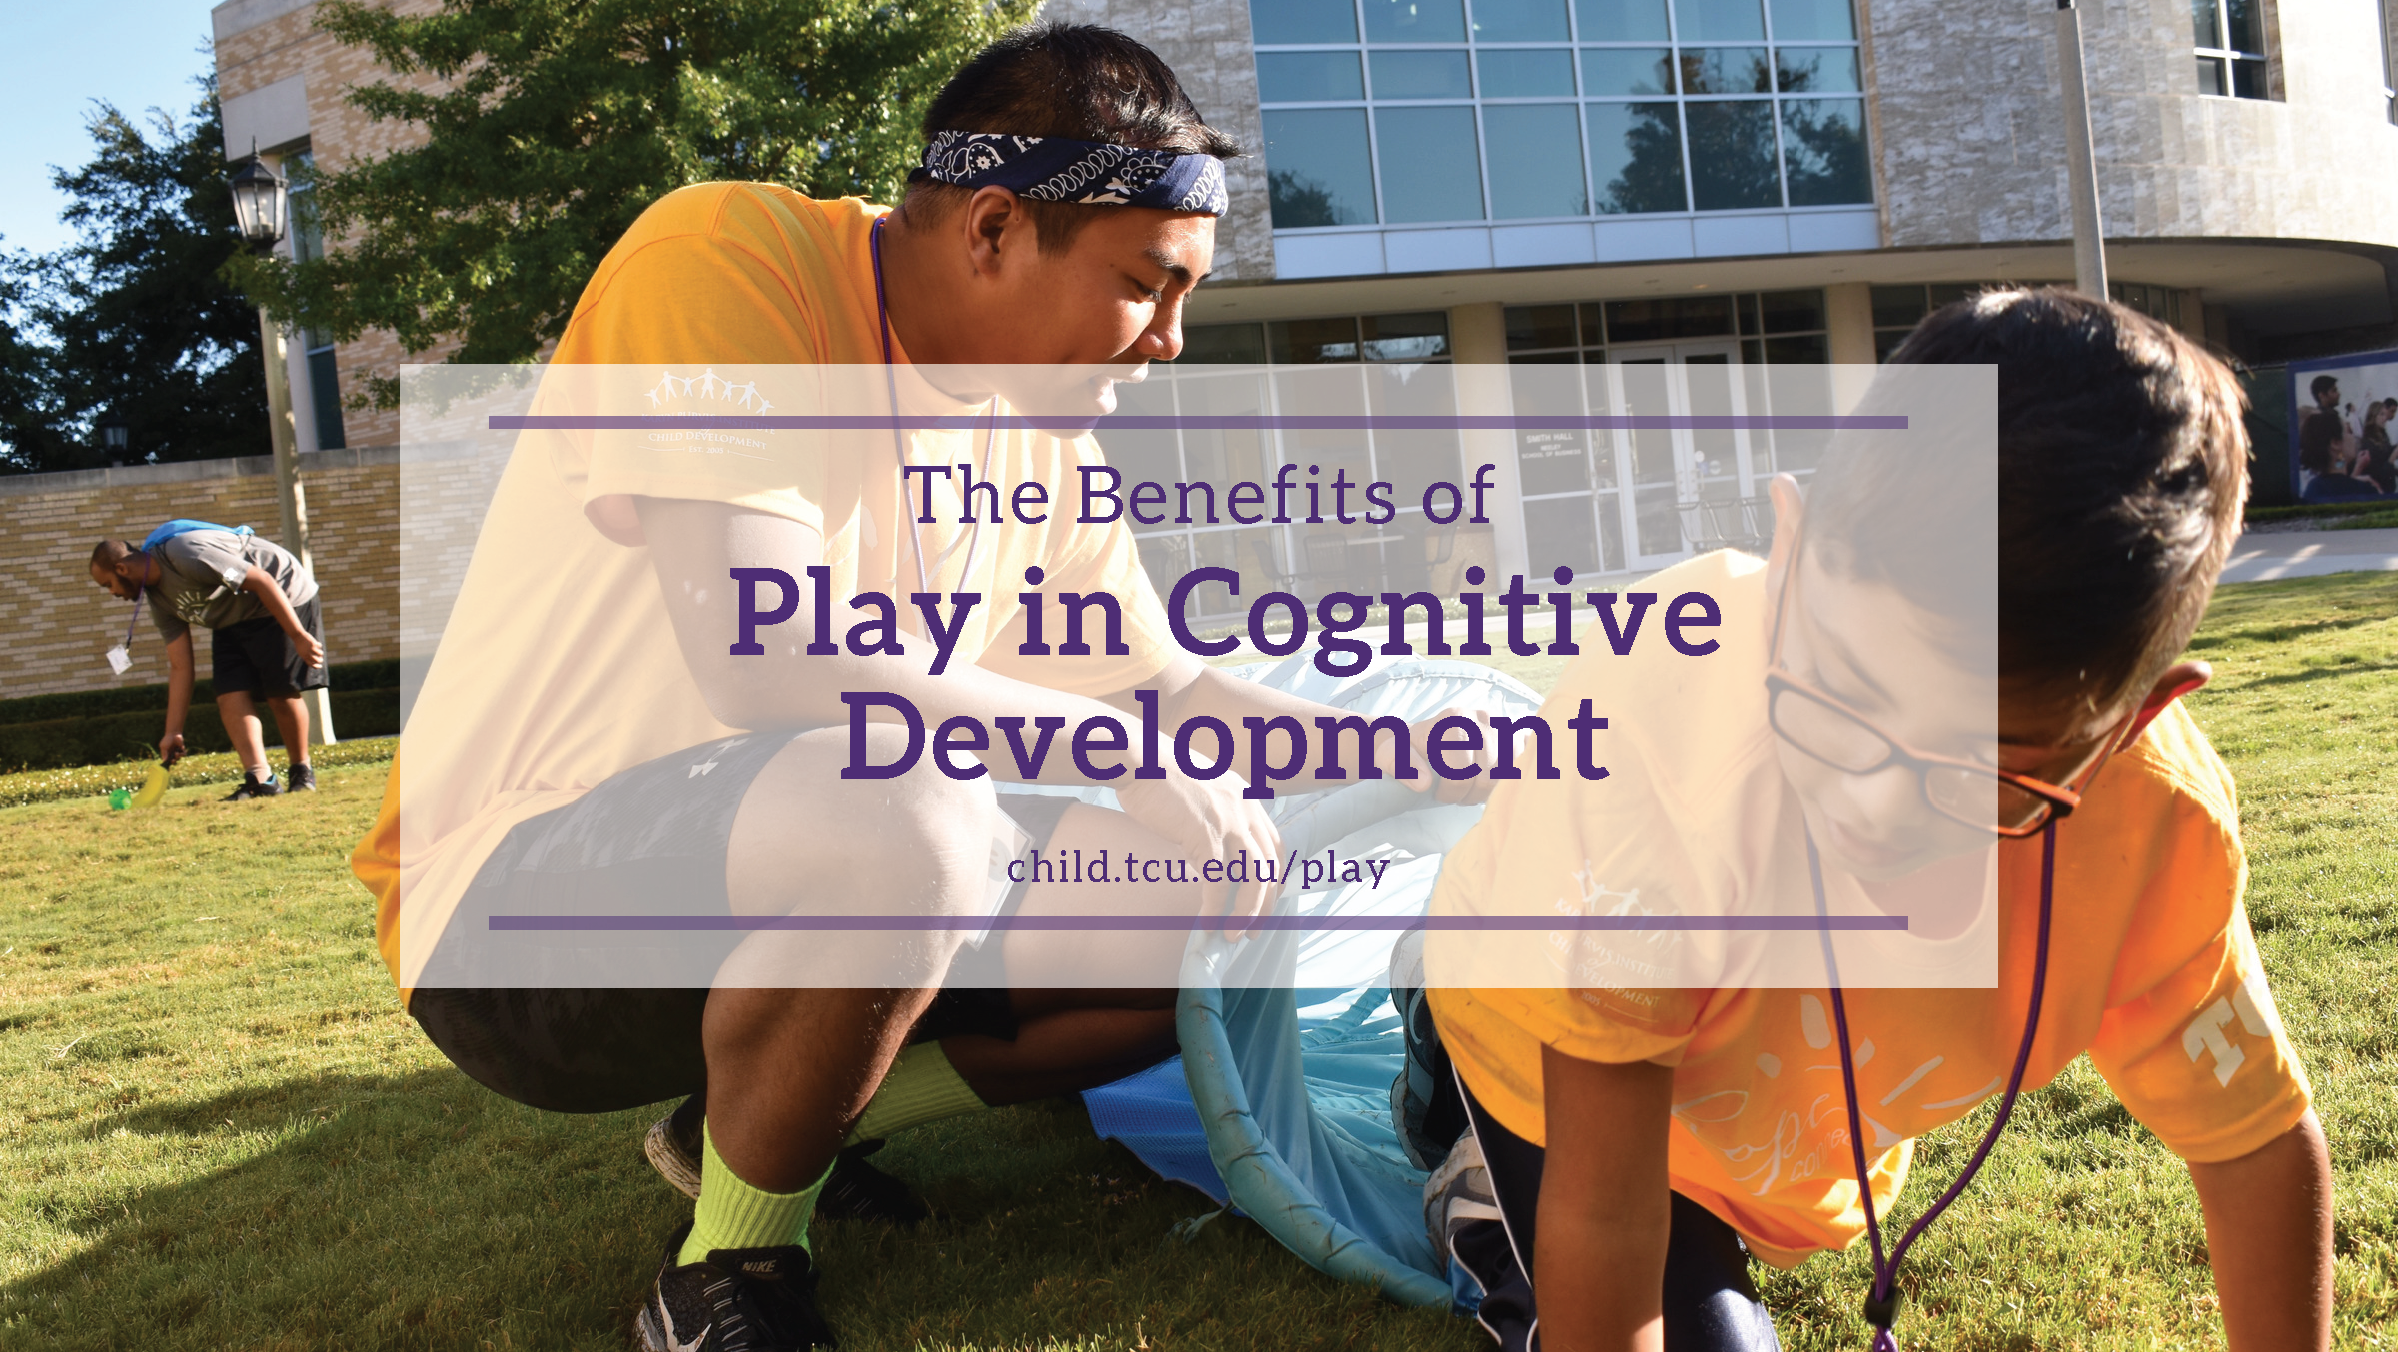 The Benefits of Play in Cognitive Development